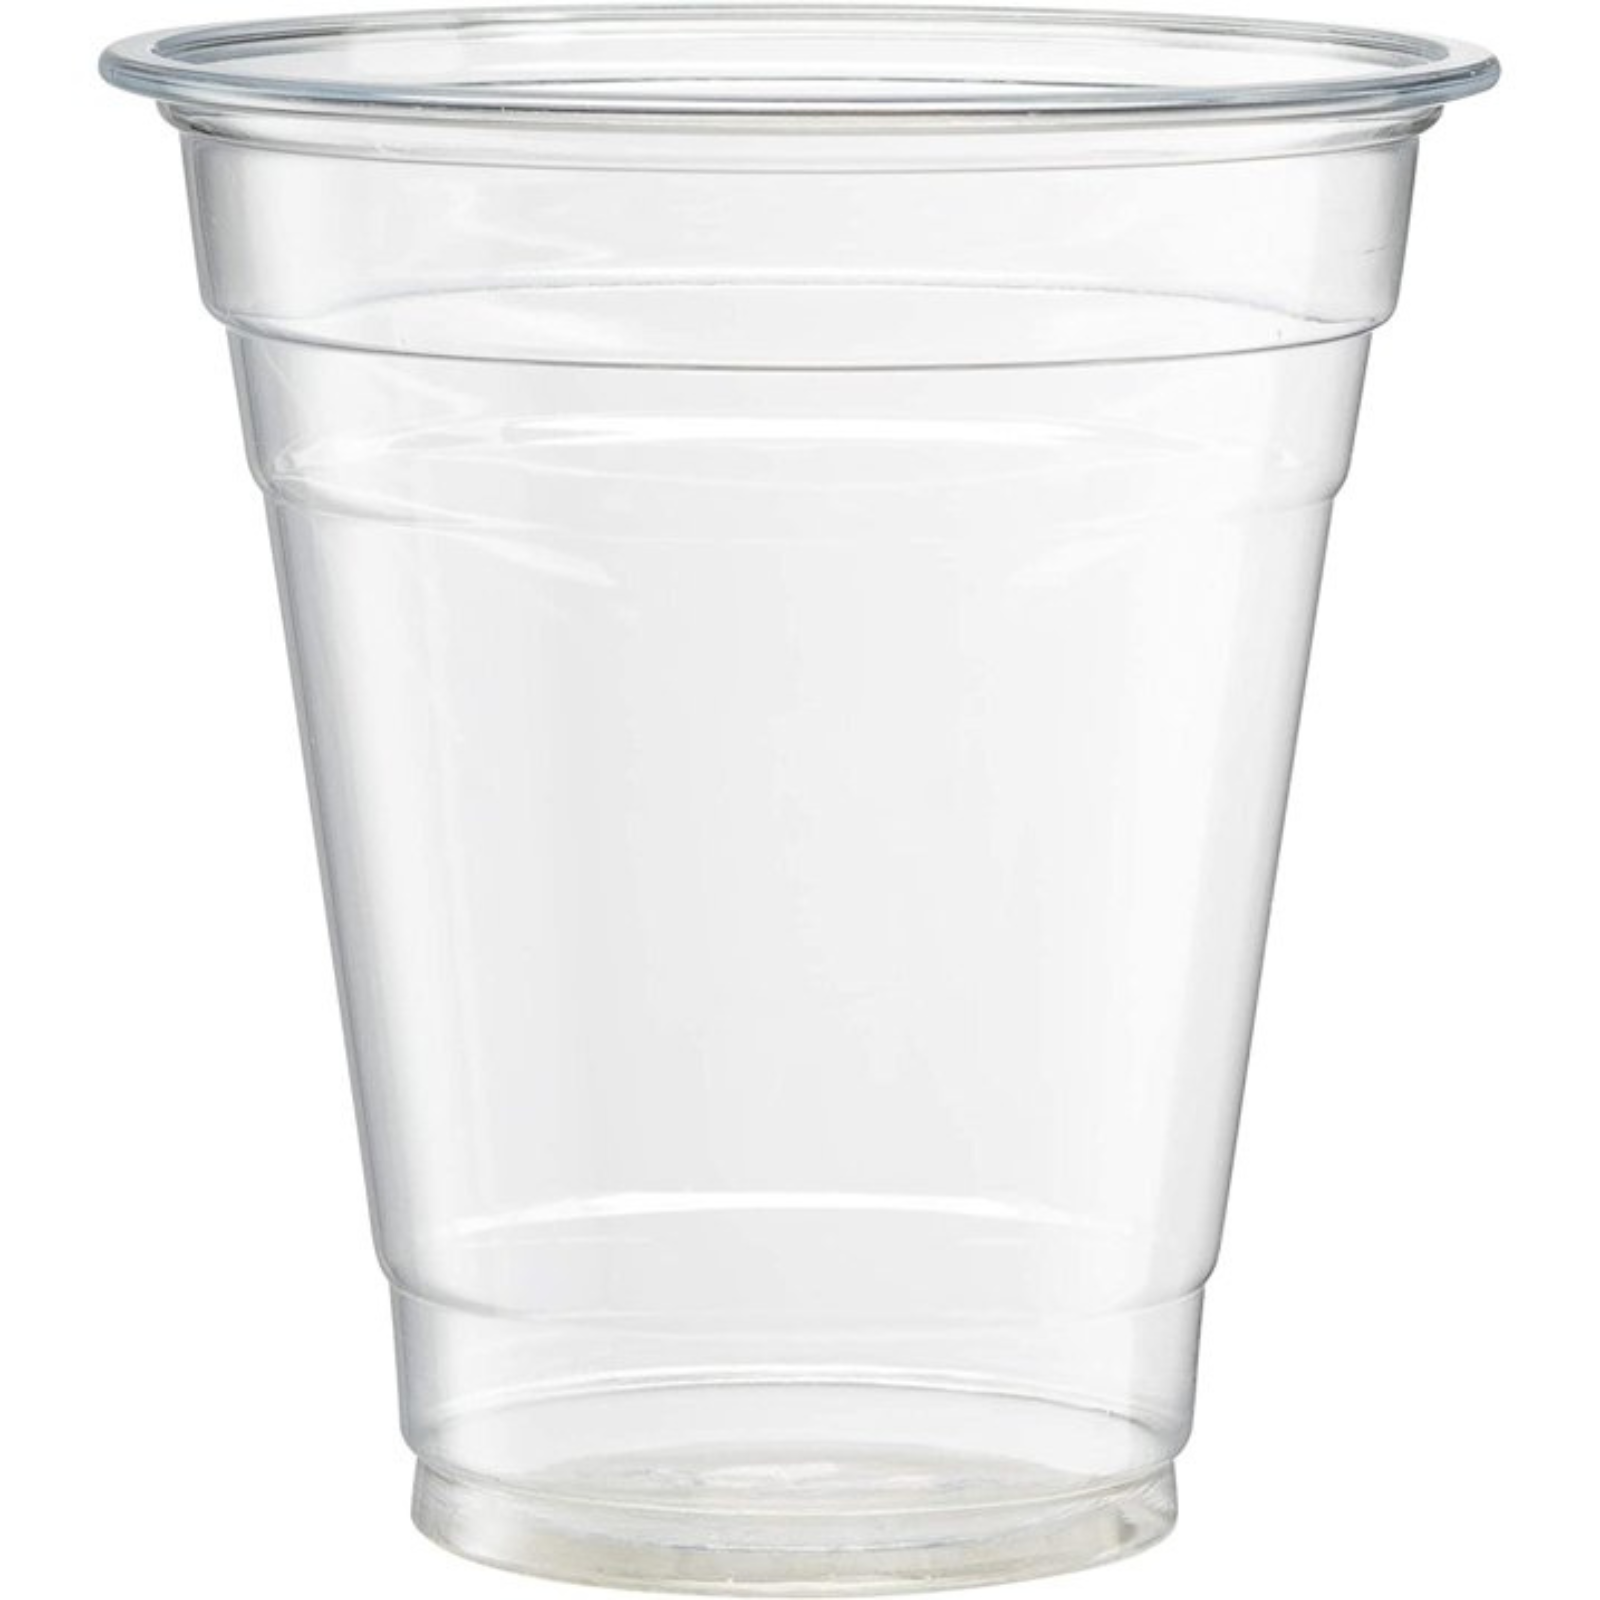 16oz Plastic Clear PET Cups With Flat Lid & Straw, for All Kinds of Beverages Smoothie Cups VeZee Cups 10 Pack 